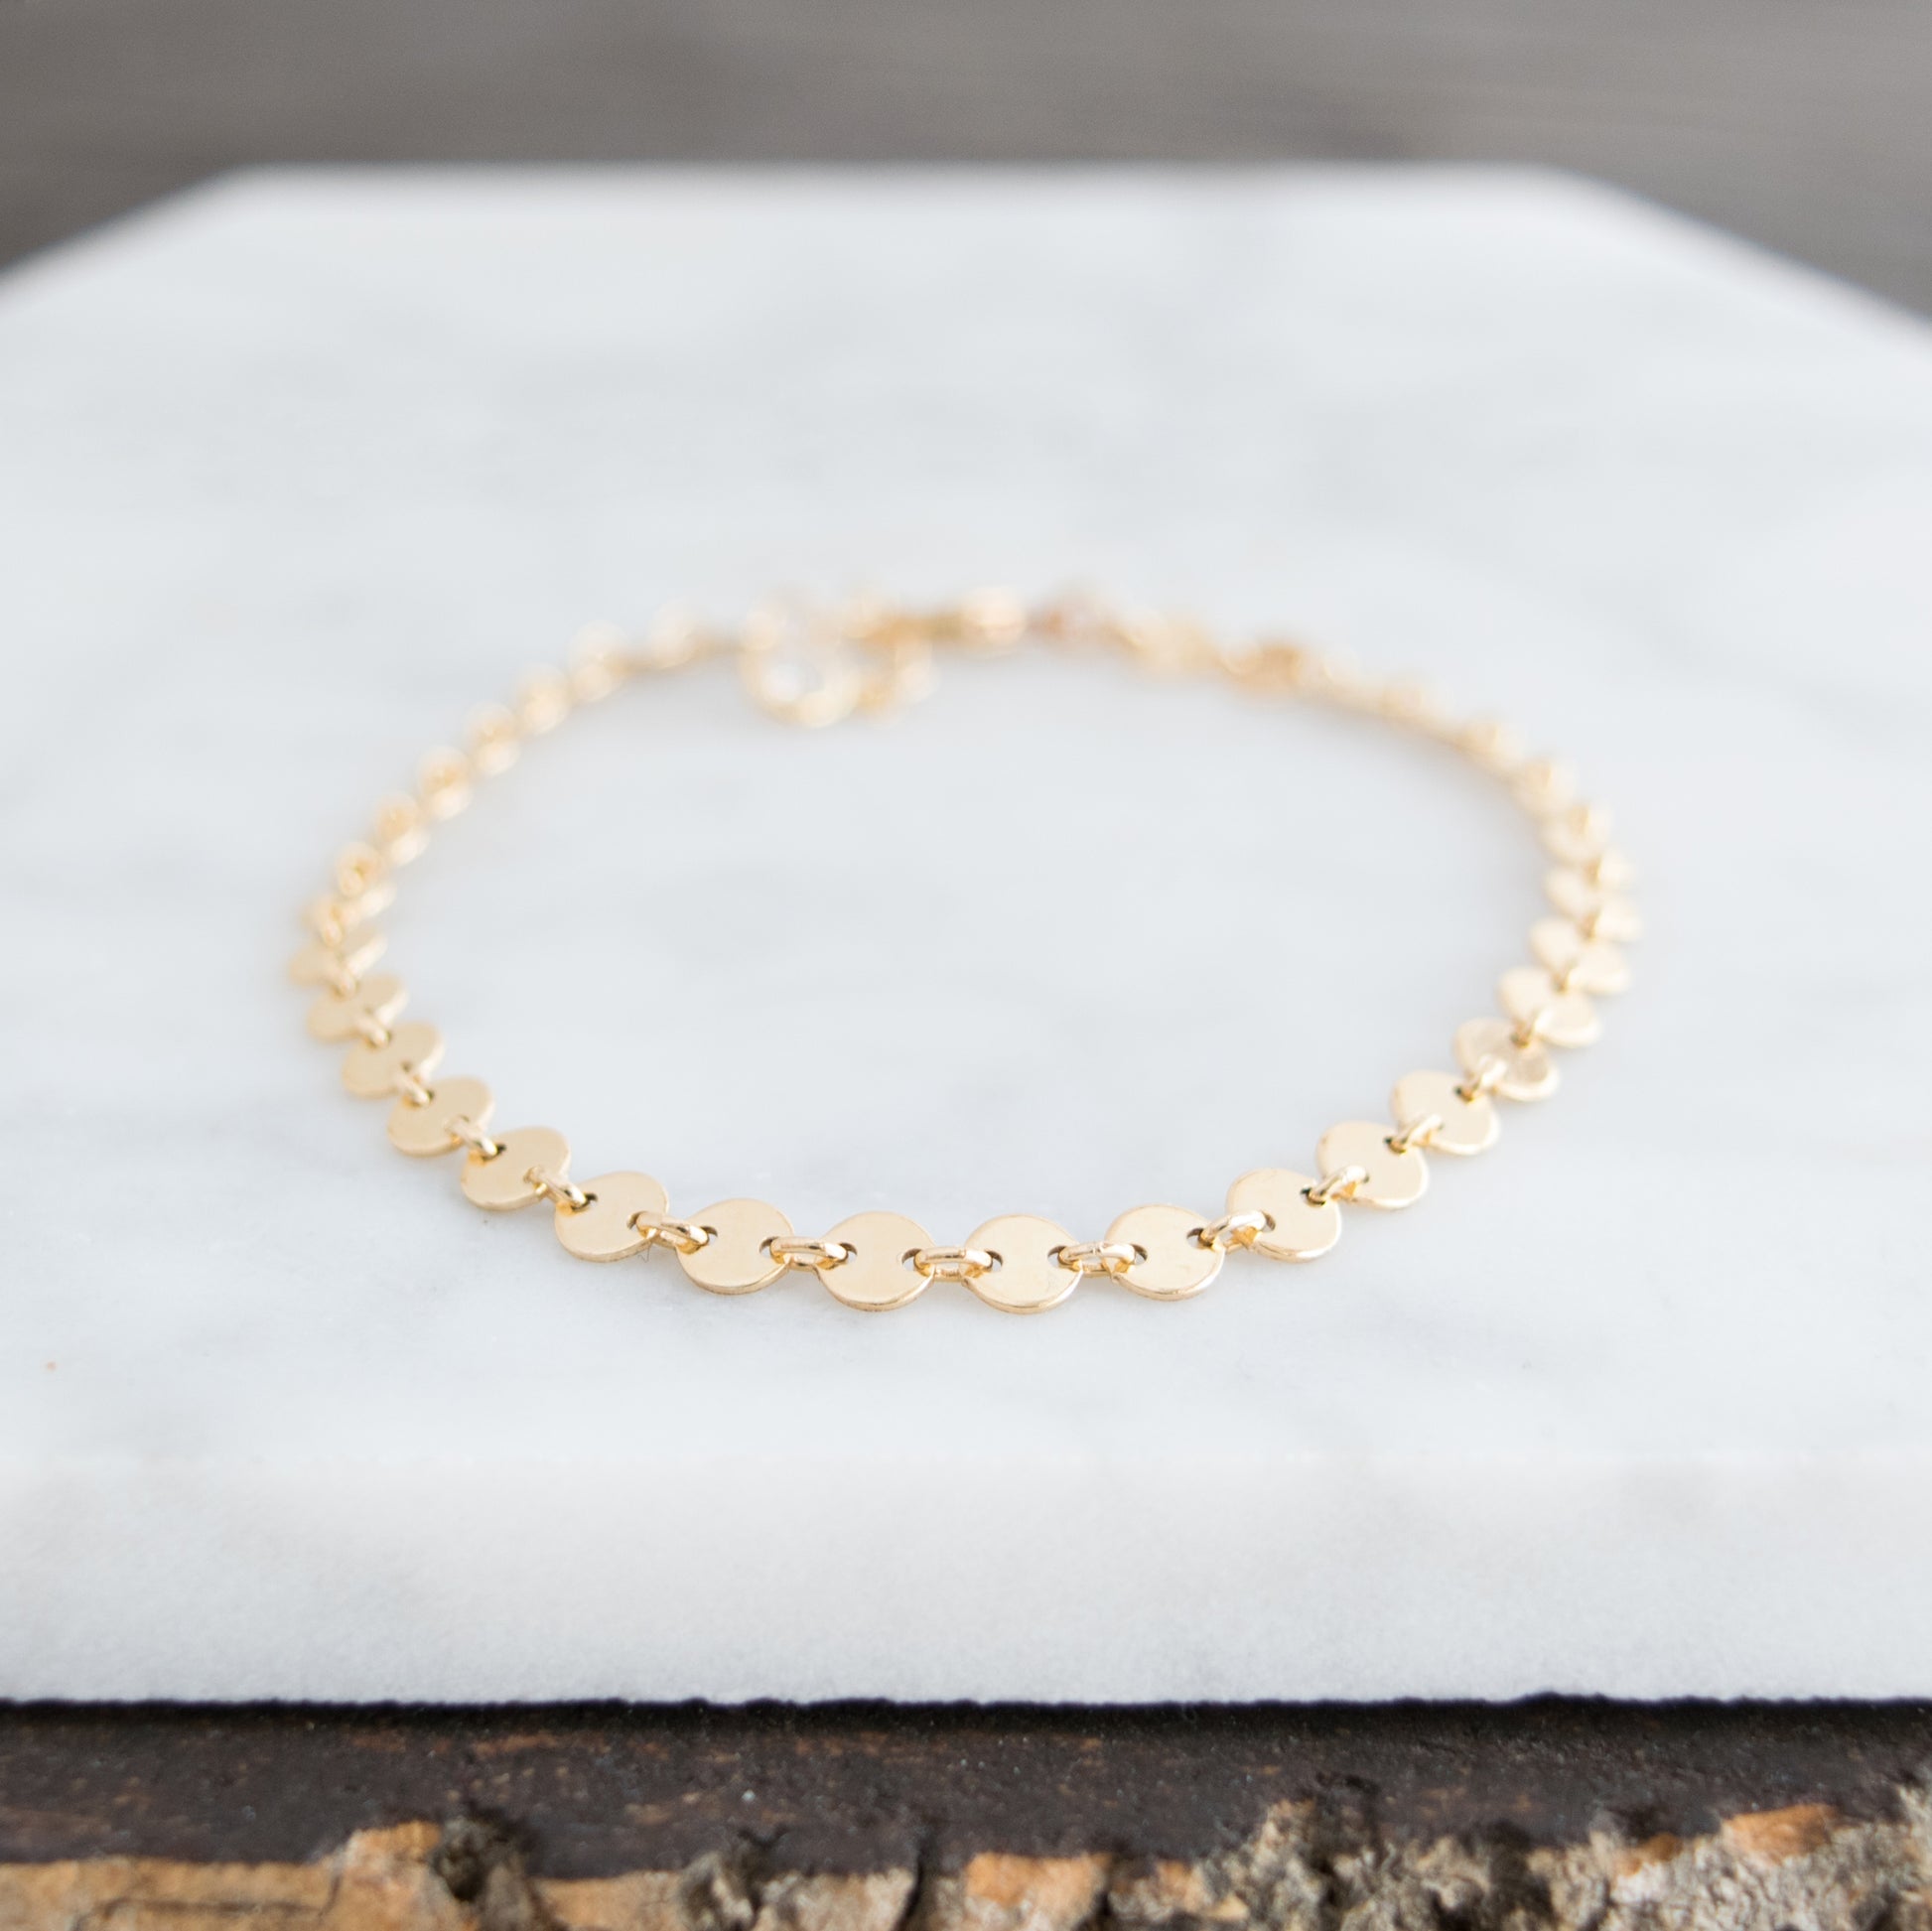 Disc chain bracelet with 1/2" extension in 14k gold-fill